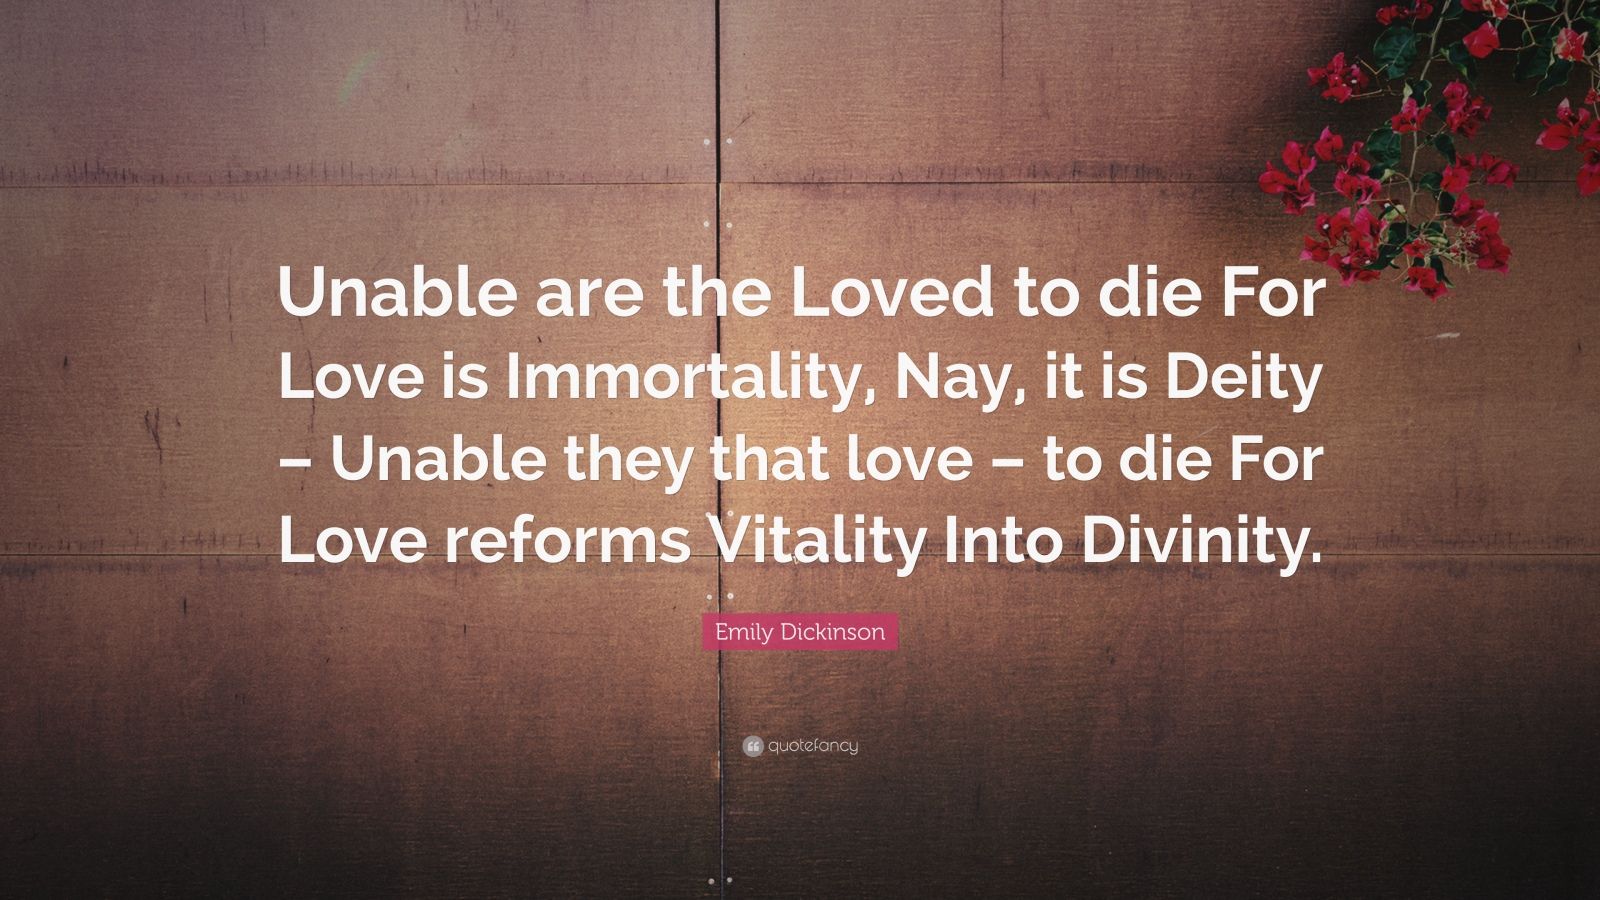 Emily Dickinson Quote: “Unable are the Loved to die For Love is ...